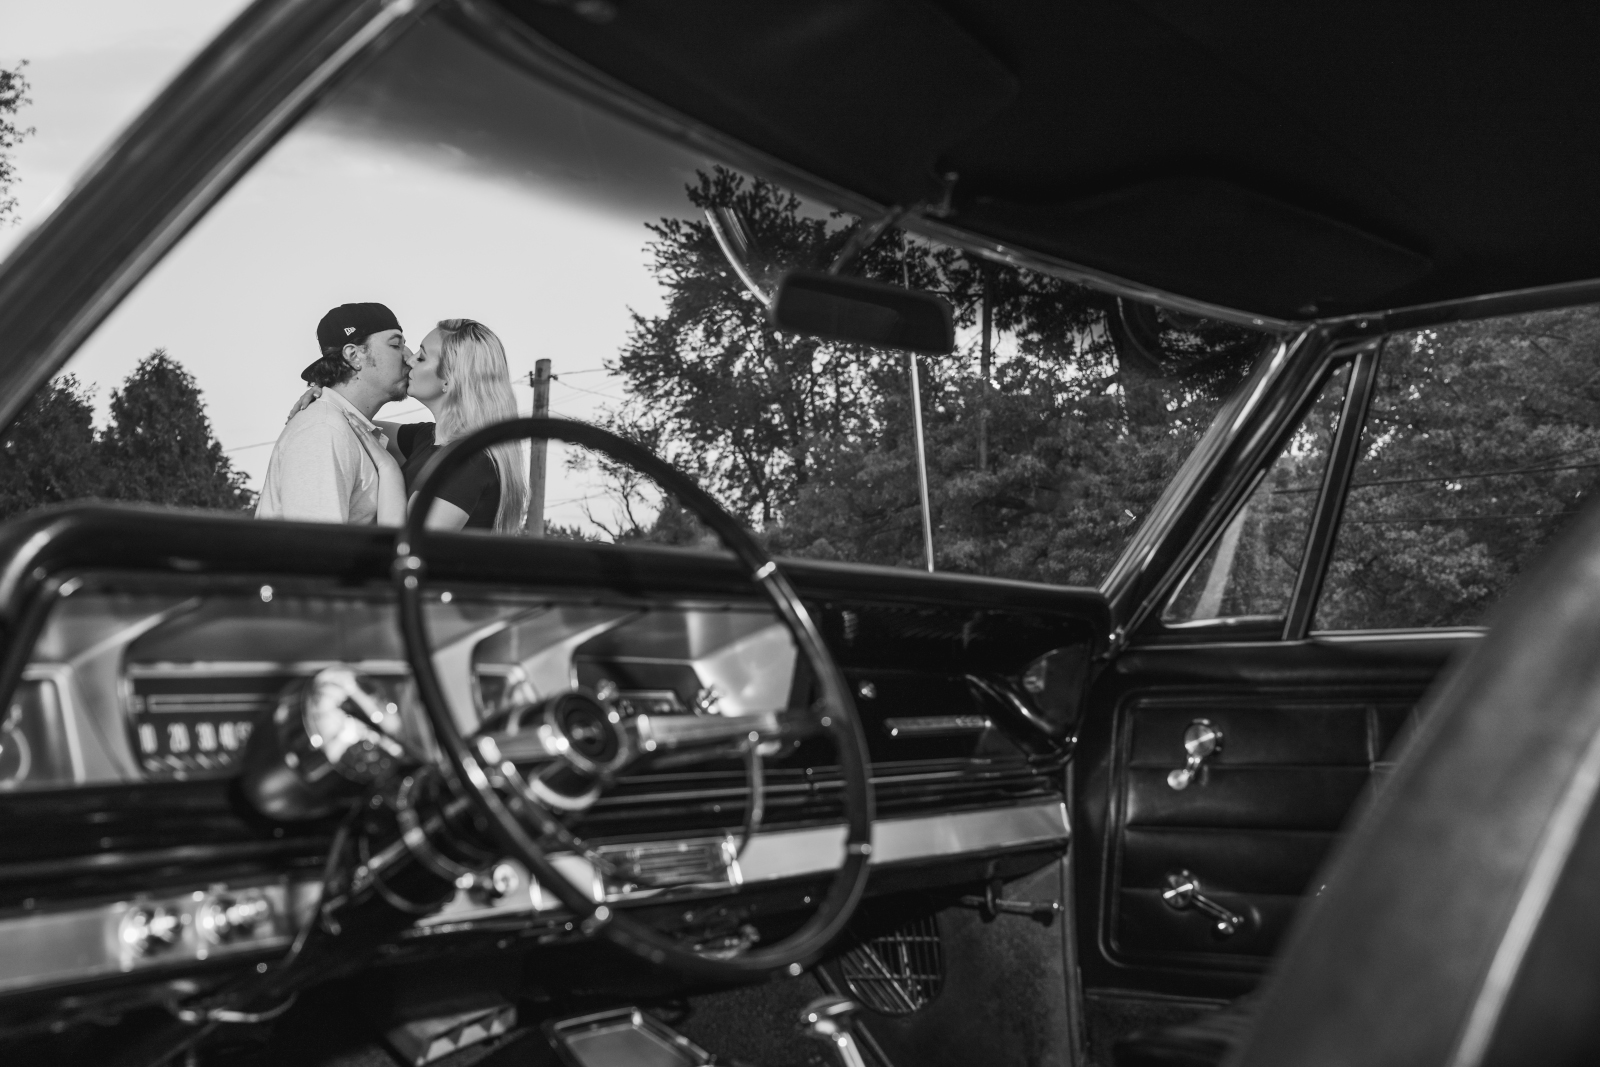 Man and woman fiancee engagement photo, couple portrait, vintage car, black and white, unique engagement photo, kiss, fall outdoor engagement photo shoot at Dairy King